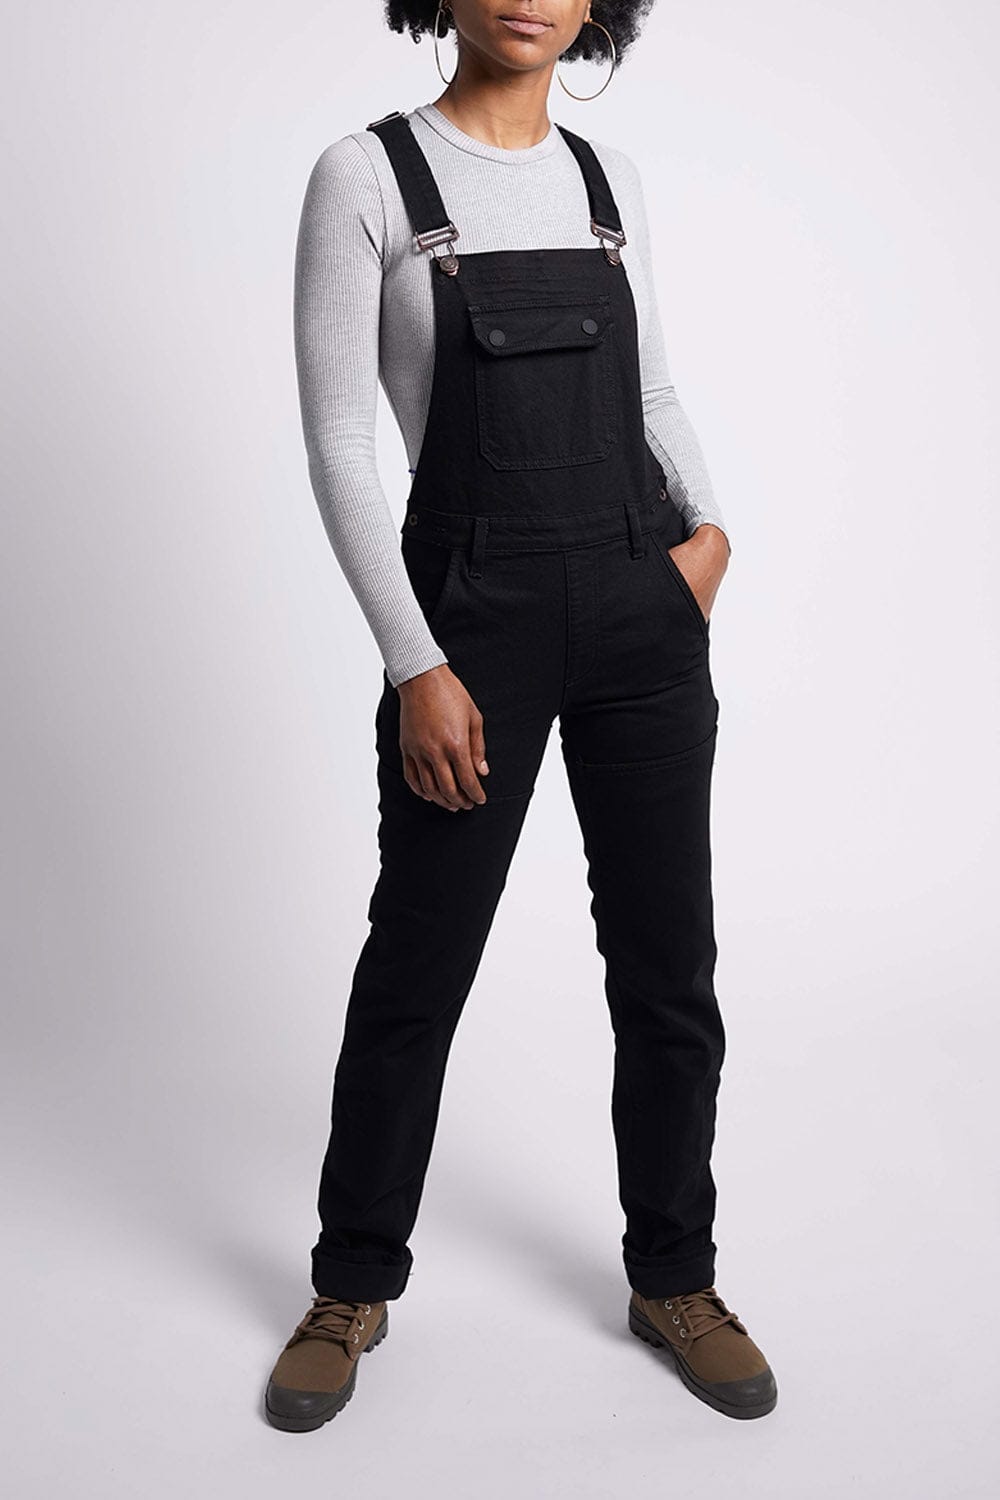 Women's Motorcycle Riding Overalls Kevlar Motorbike Racing Pants with  Removable Armor. Features Protective DuPont™ Kevlar®, Pockets for D3O®  Armor at the Hips and Knees. - Tobacco Motorwear